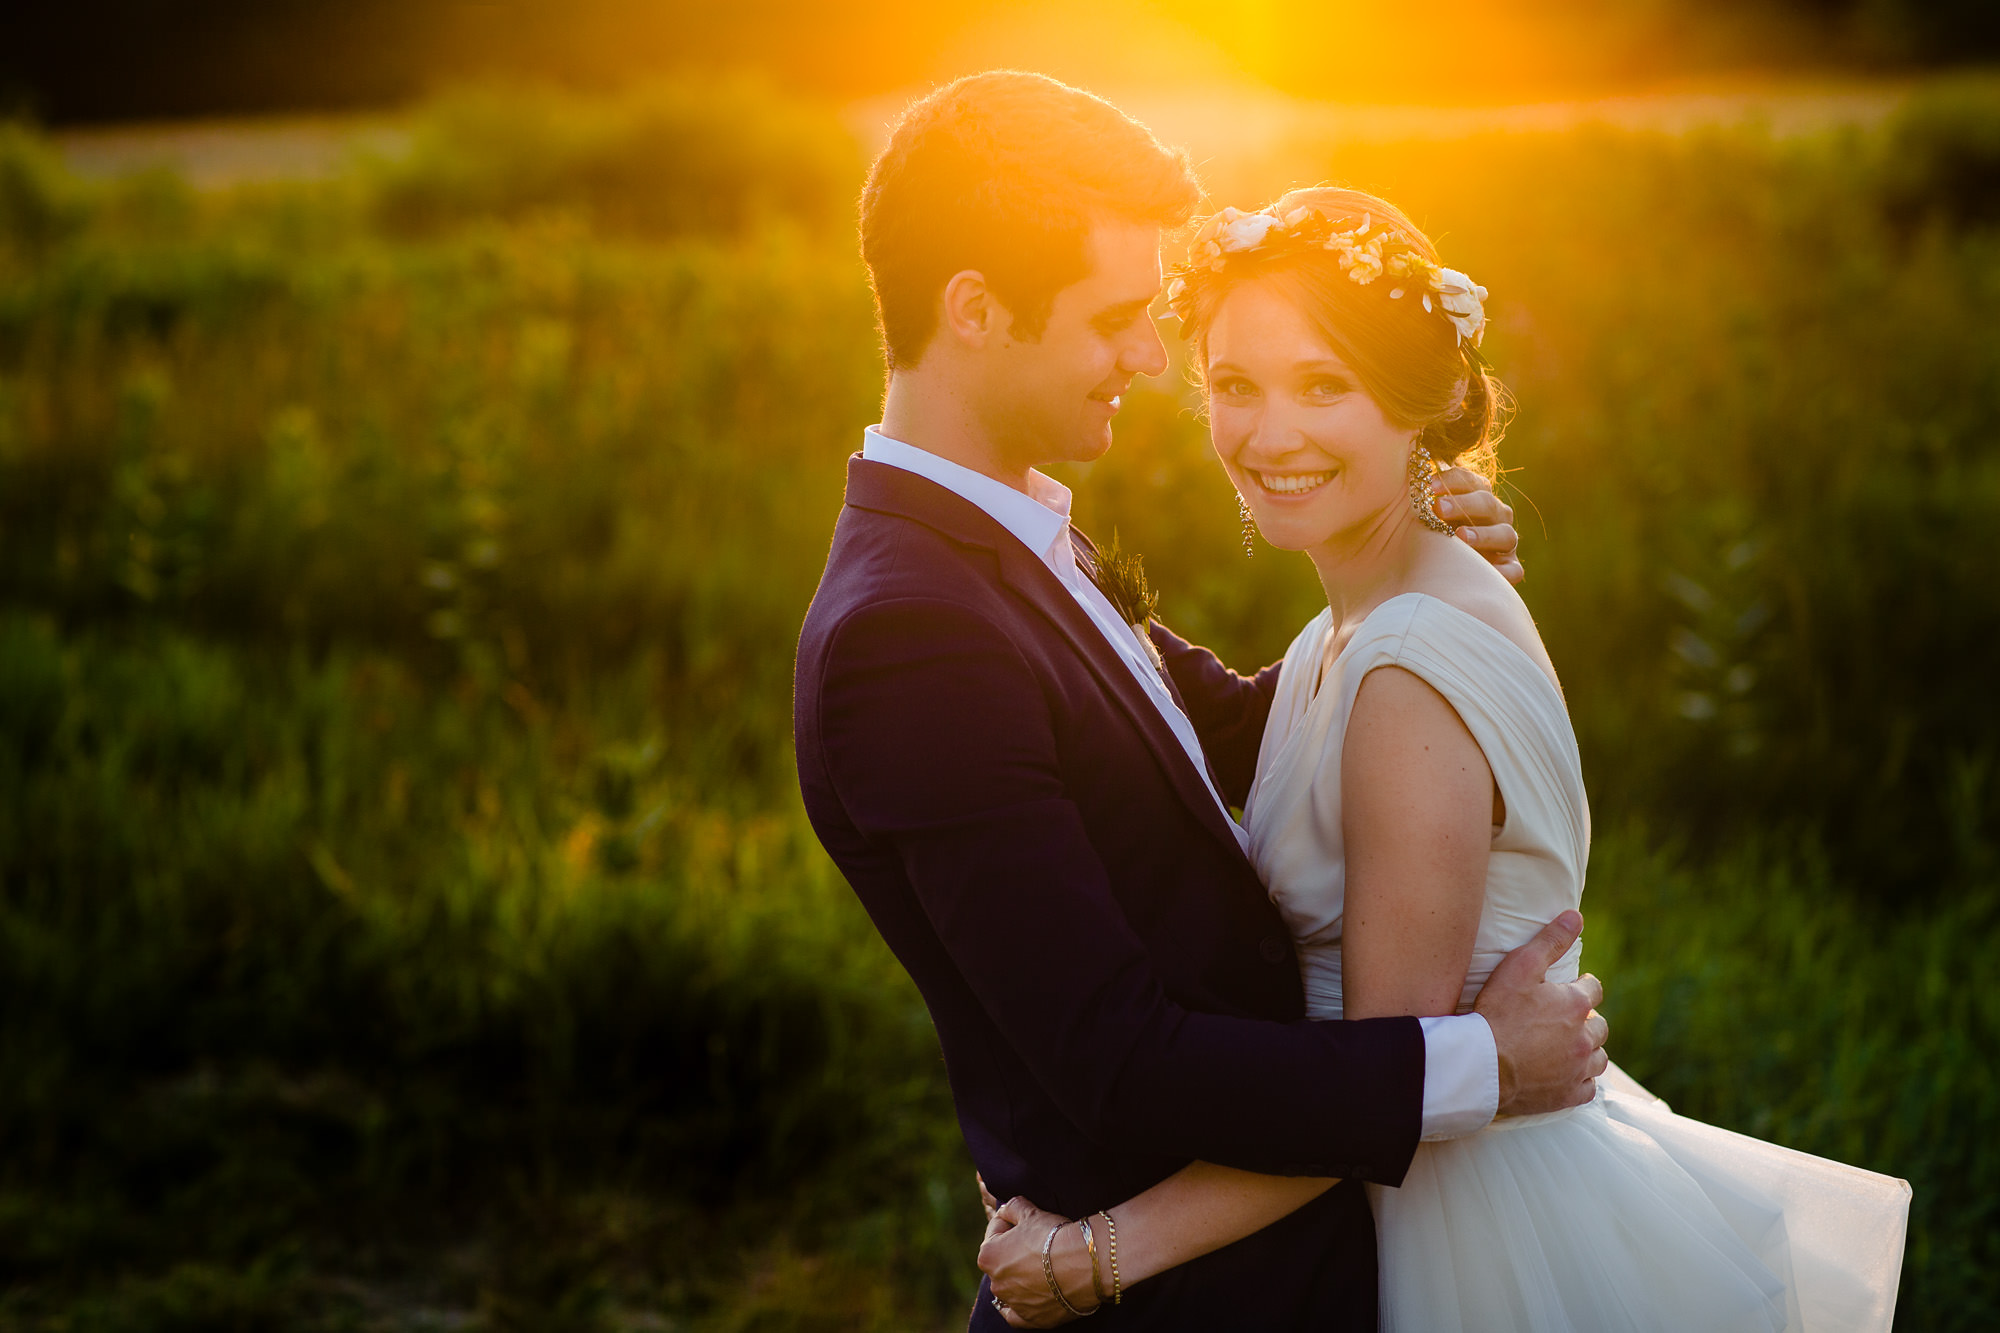 A beautiful sunset wedding portrait taken at Laudholm Farm in Wells, Maine